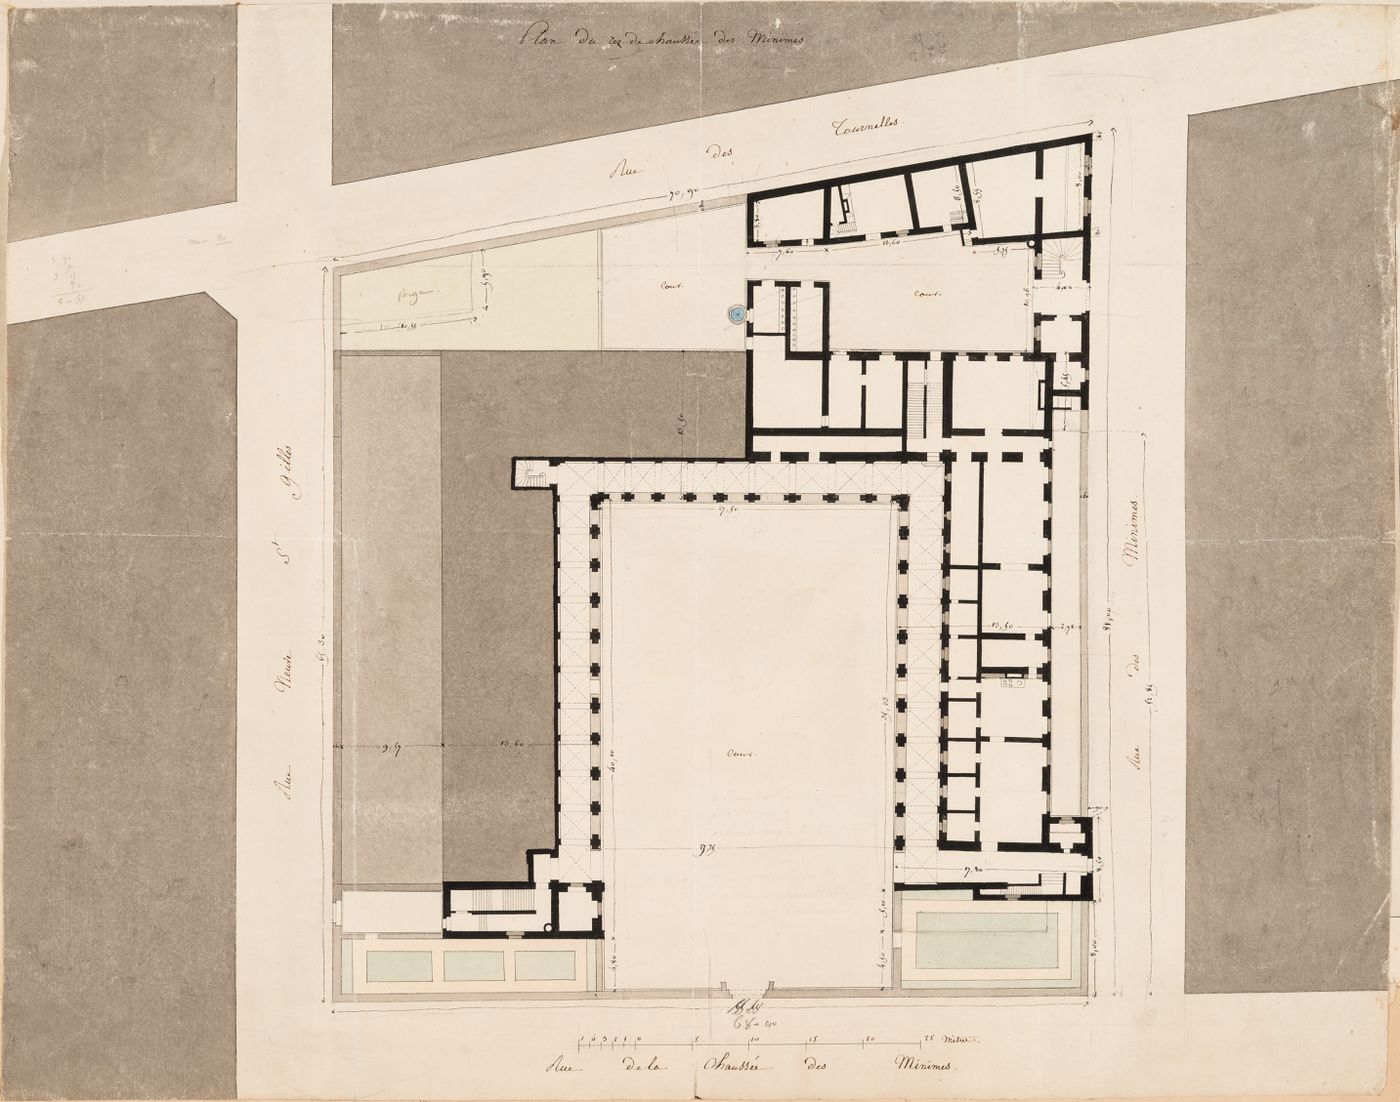 Project for alterations to the Caserne des Minimes, rue des Minimes: Ground floor plan